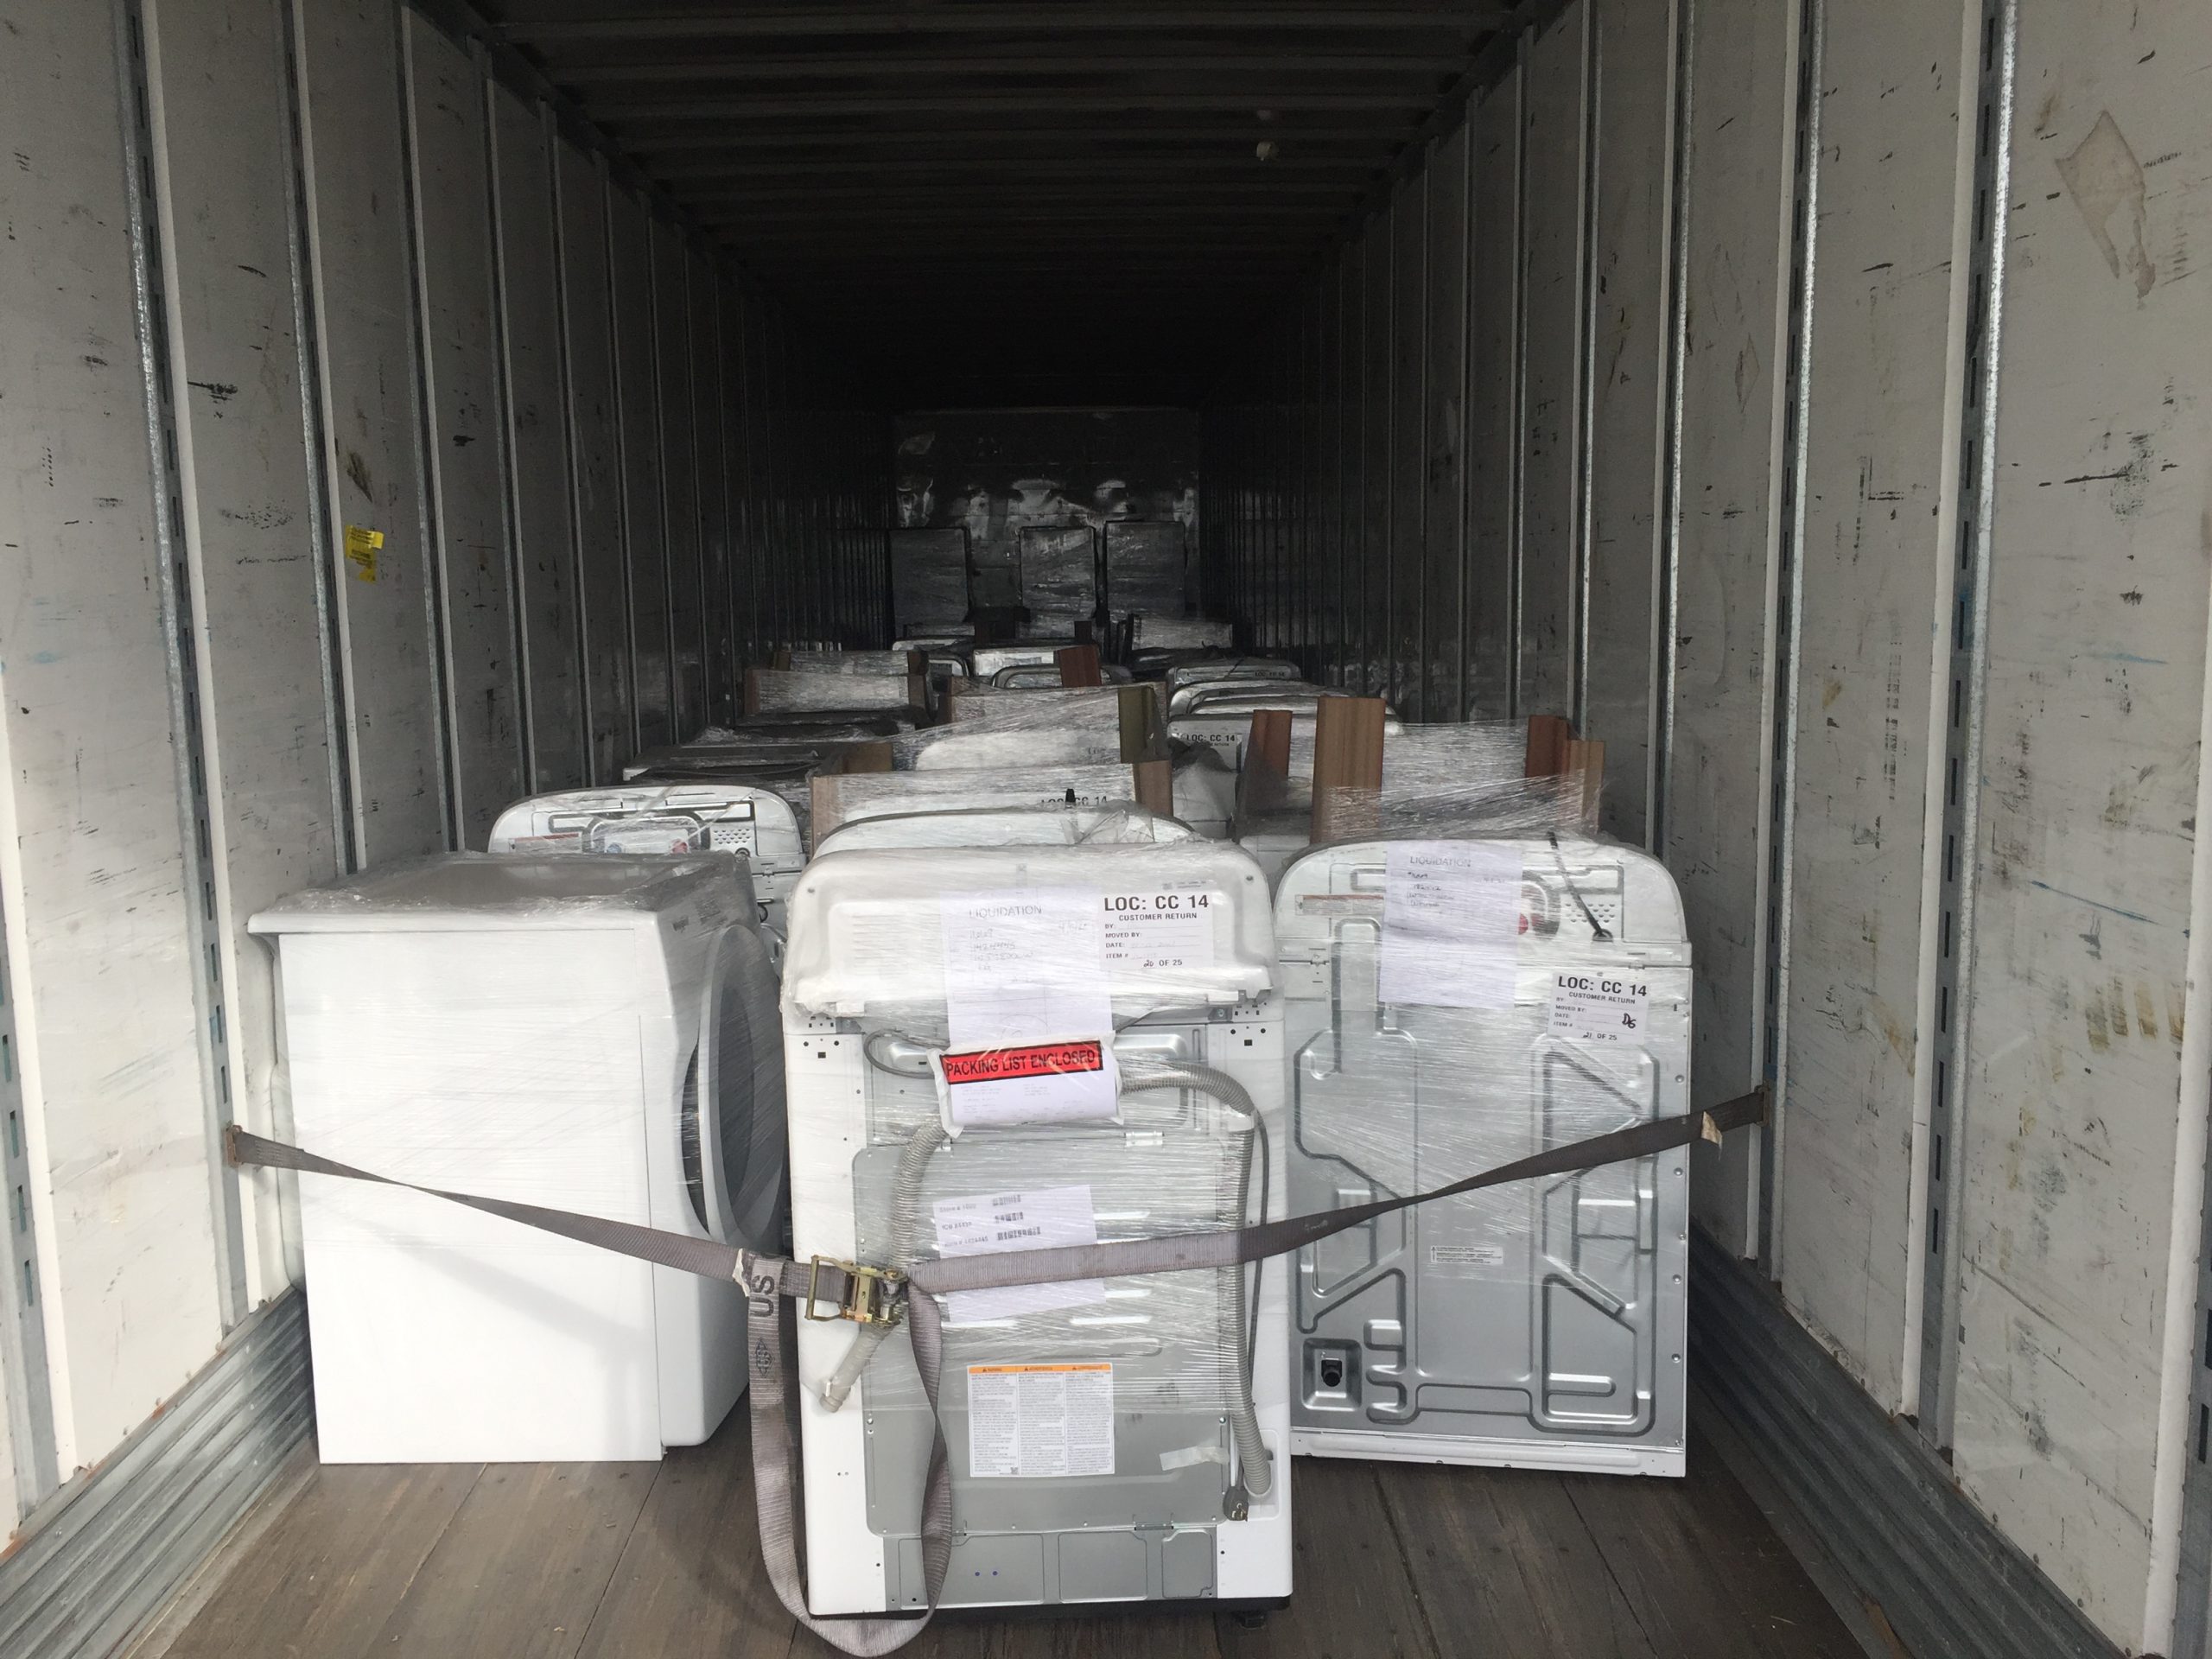 example pictures of Truckload of washers and dryers from this Best Buy liquidation program.